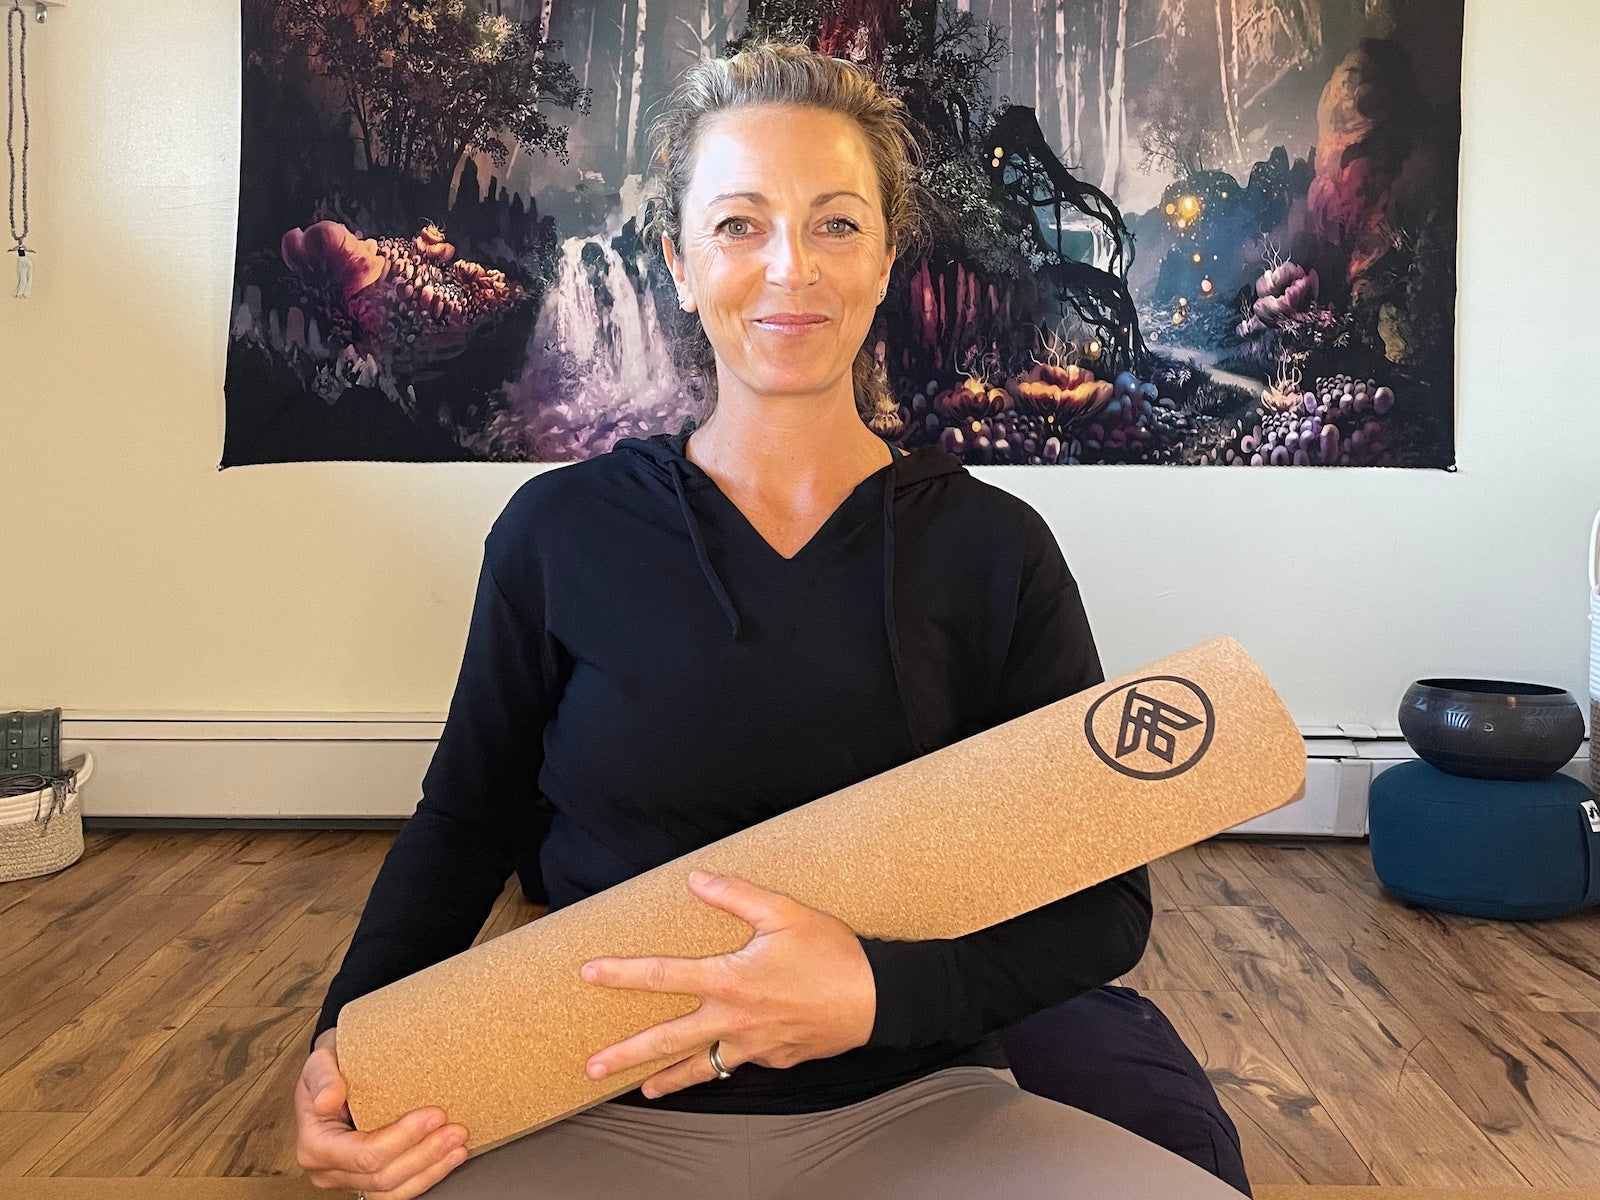 Load video: Niki tells us her experience with her Flux cork yoga mat